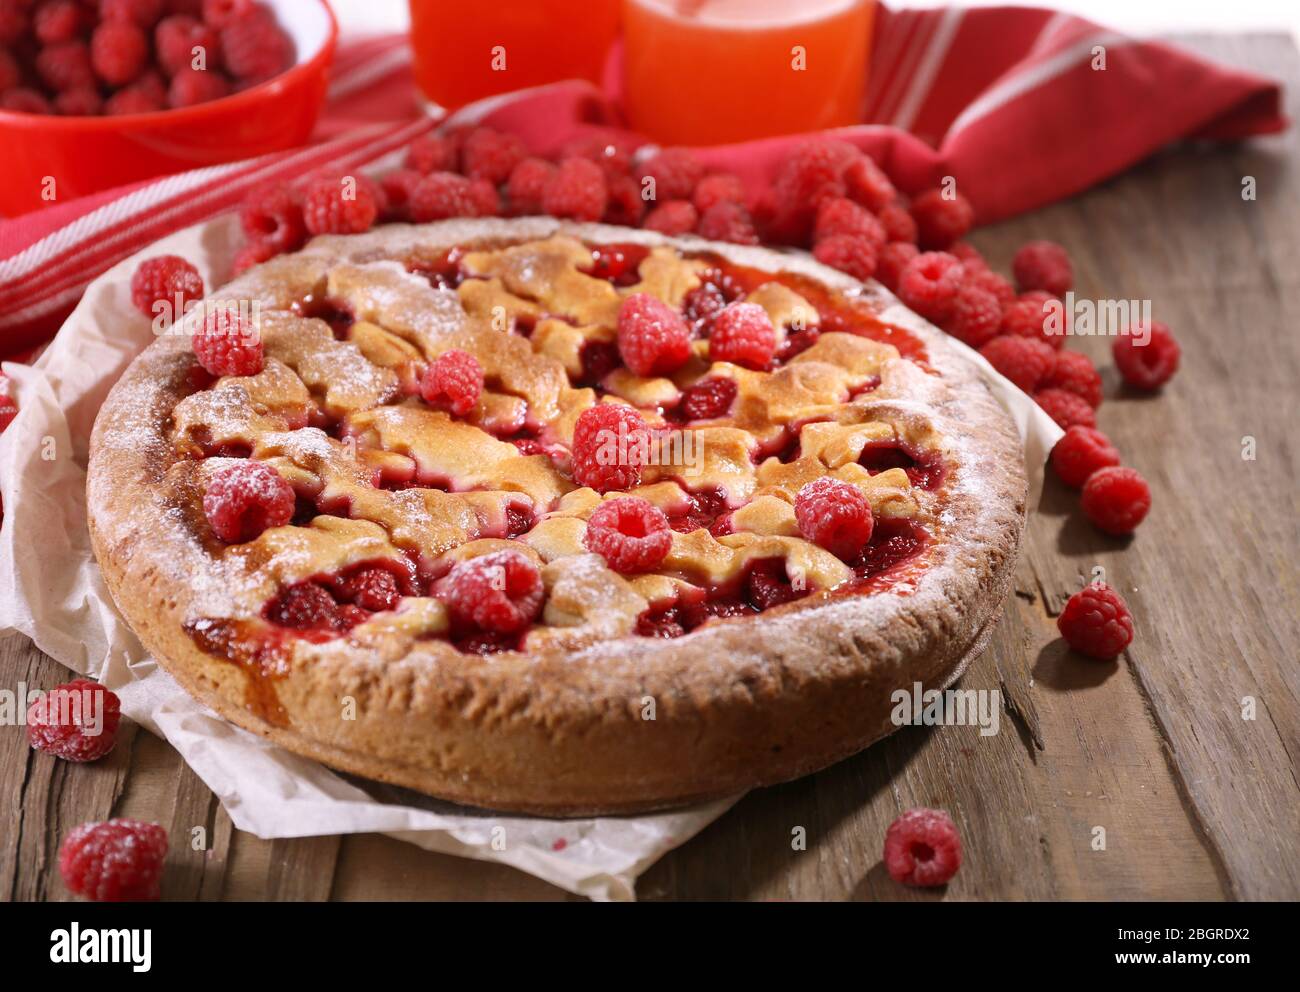 Tasty cake with berries on table close-up Stock Photo